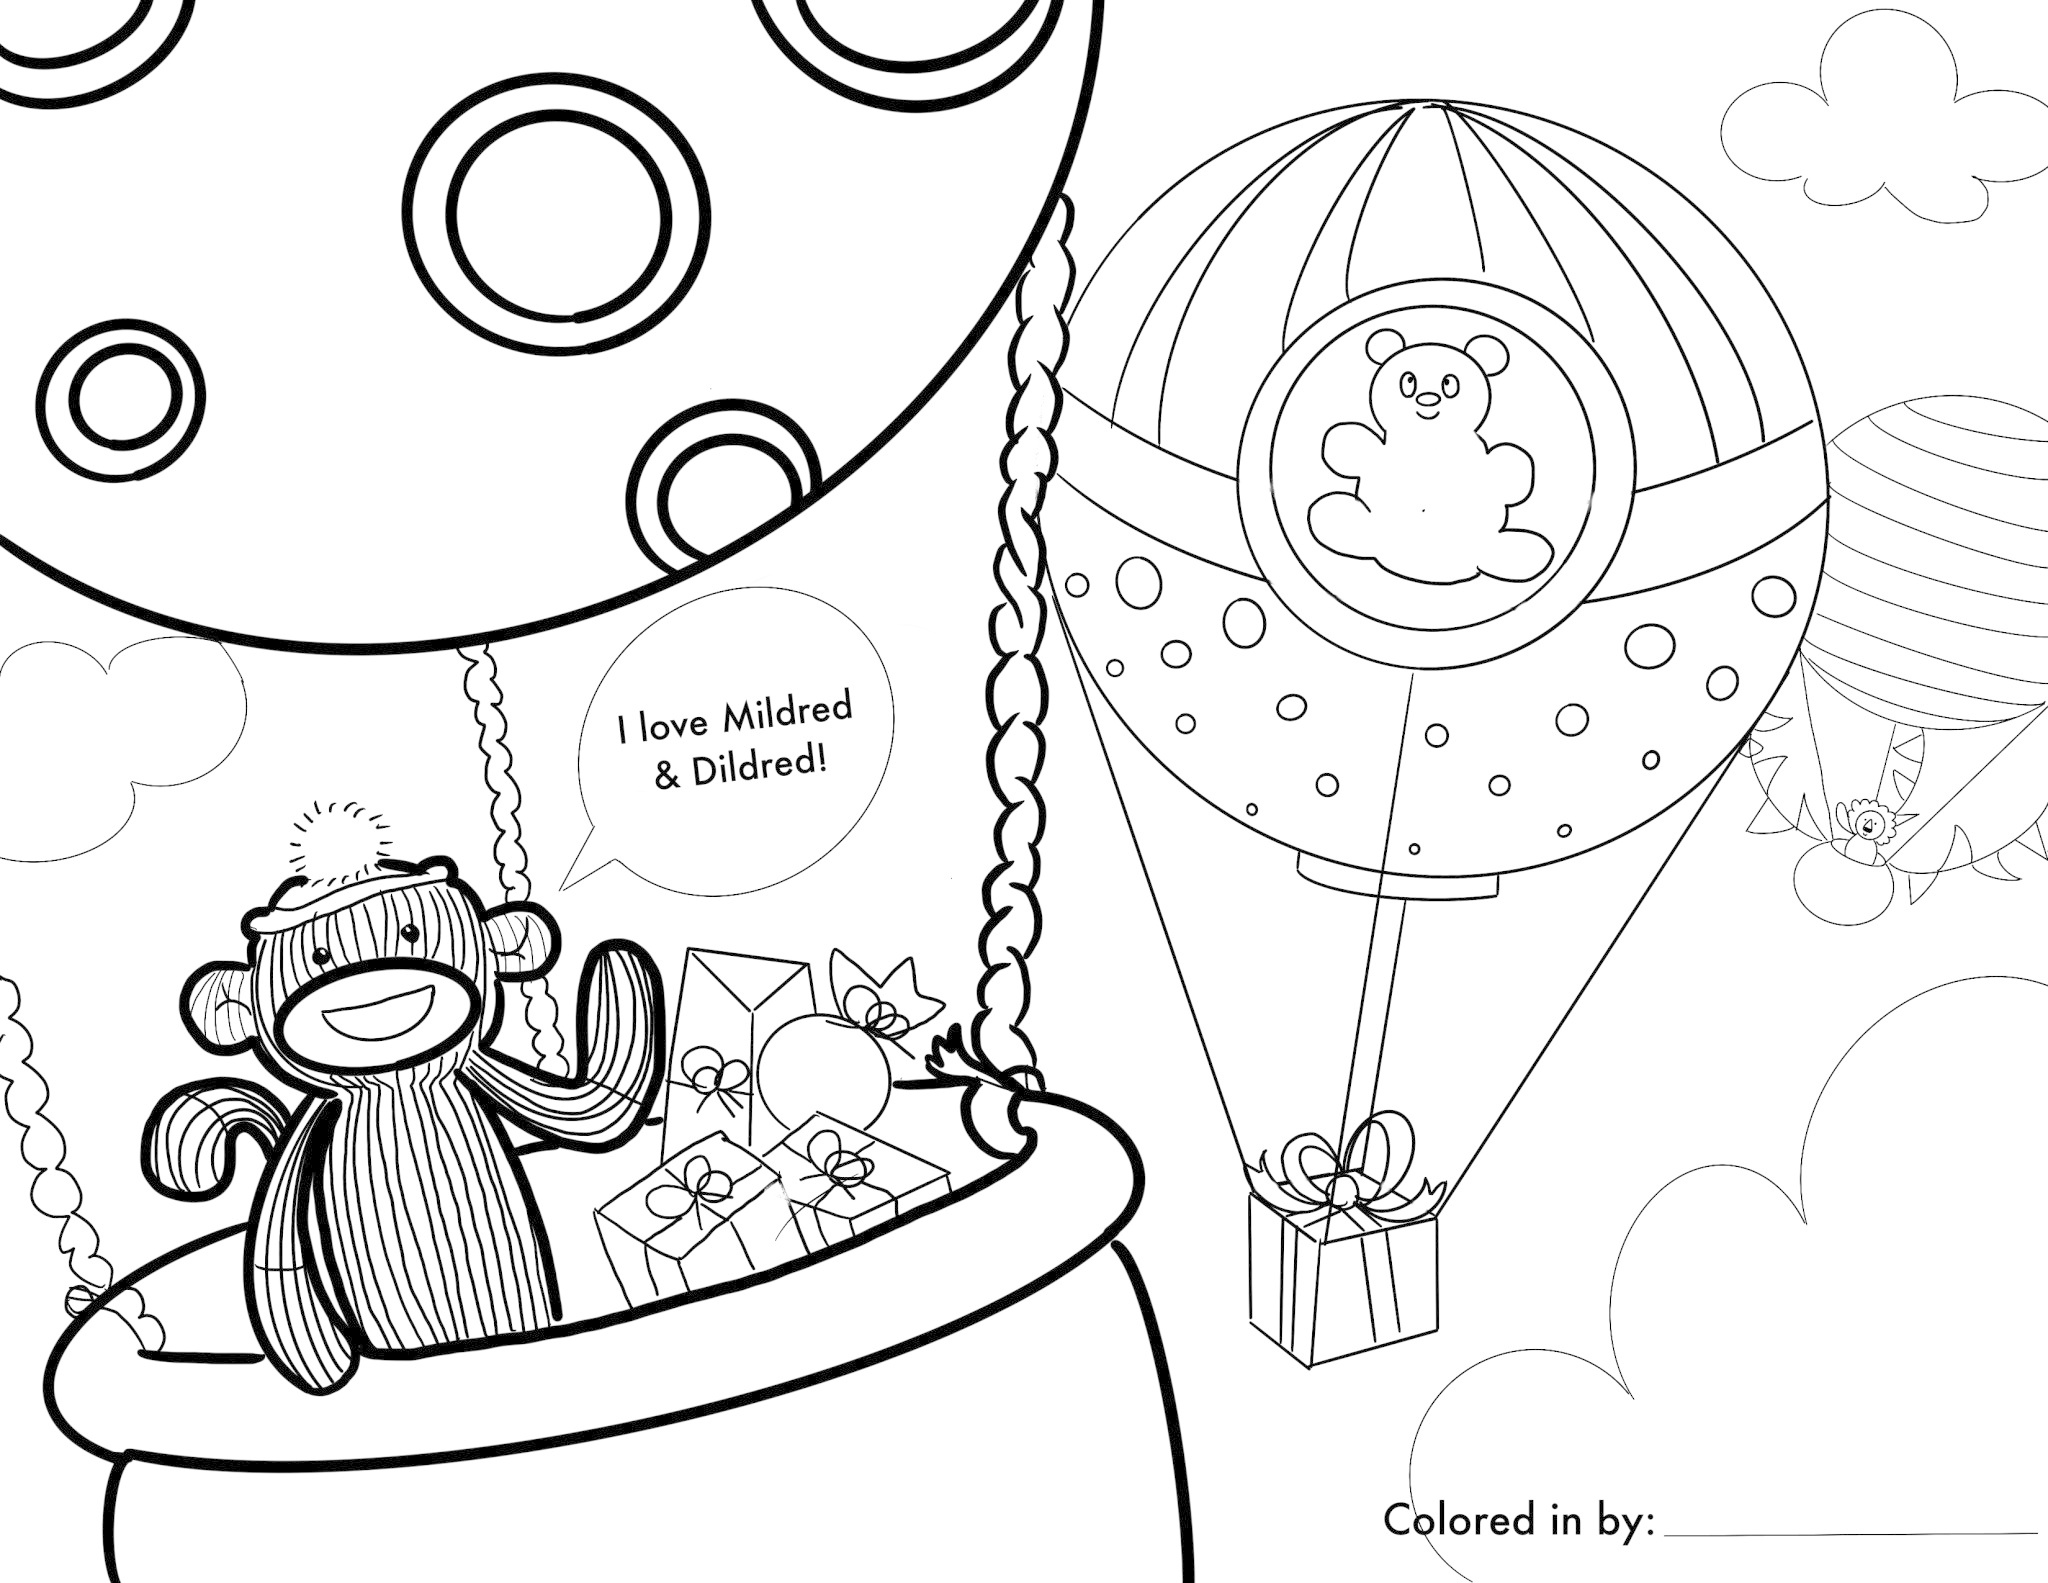 hot-air-balloon-coloring-page-mildred-dildred